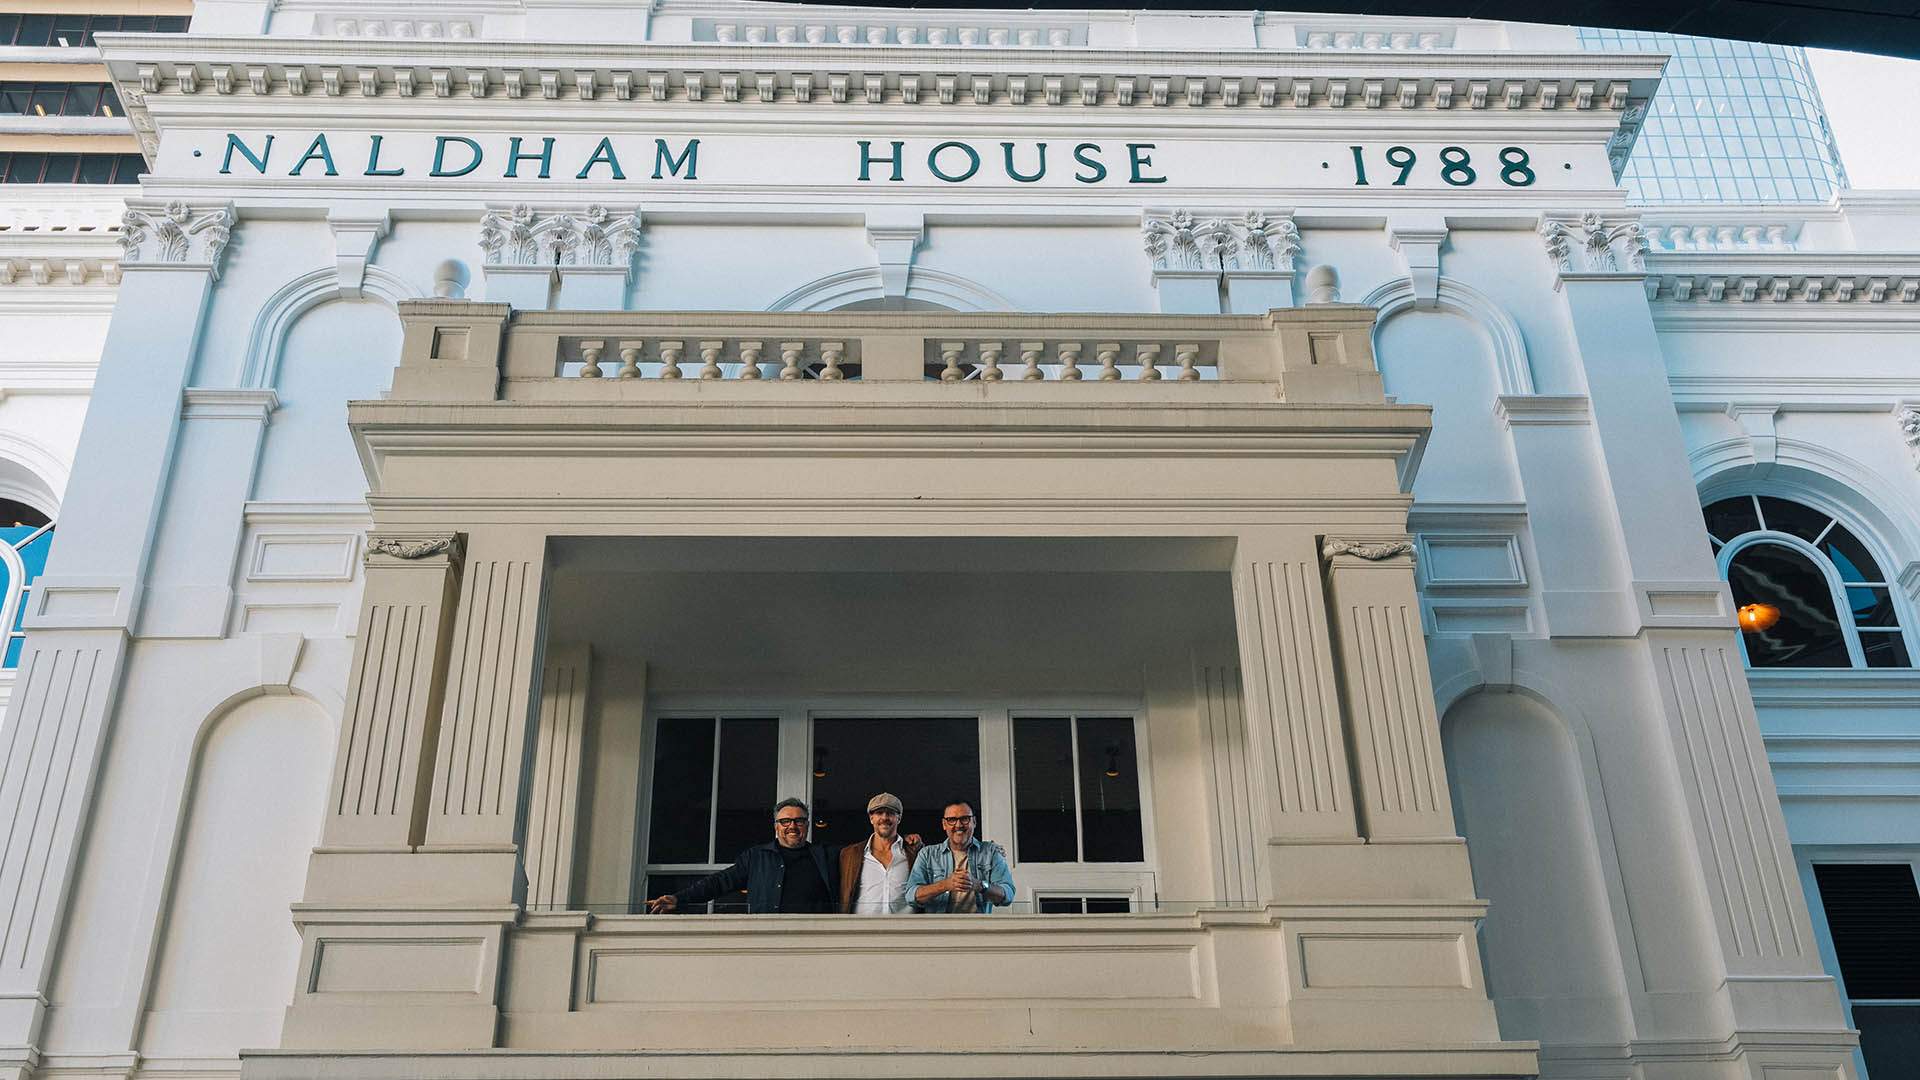 Coming Soon: Felix Street's Heritage-Listed Naldham House Is Reopening as a New Dining and Drinking Hub